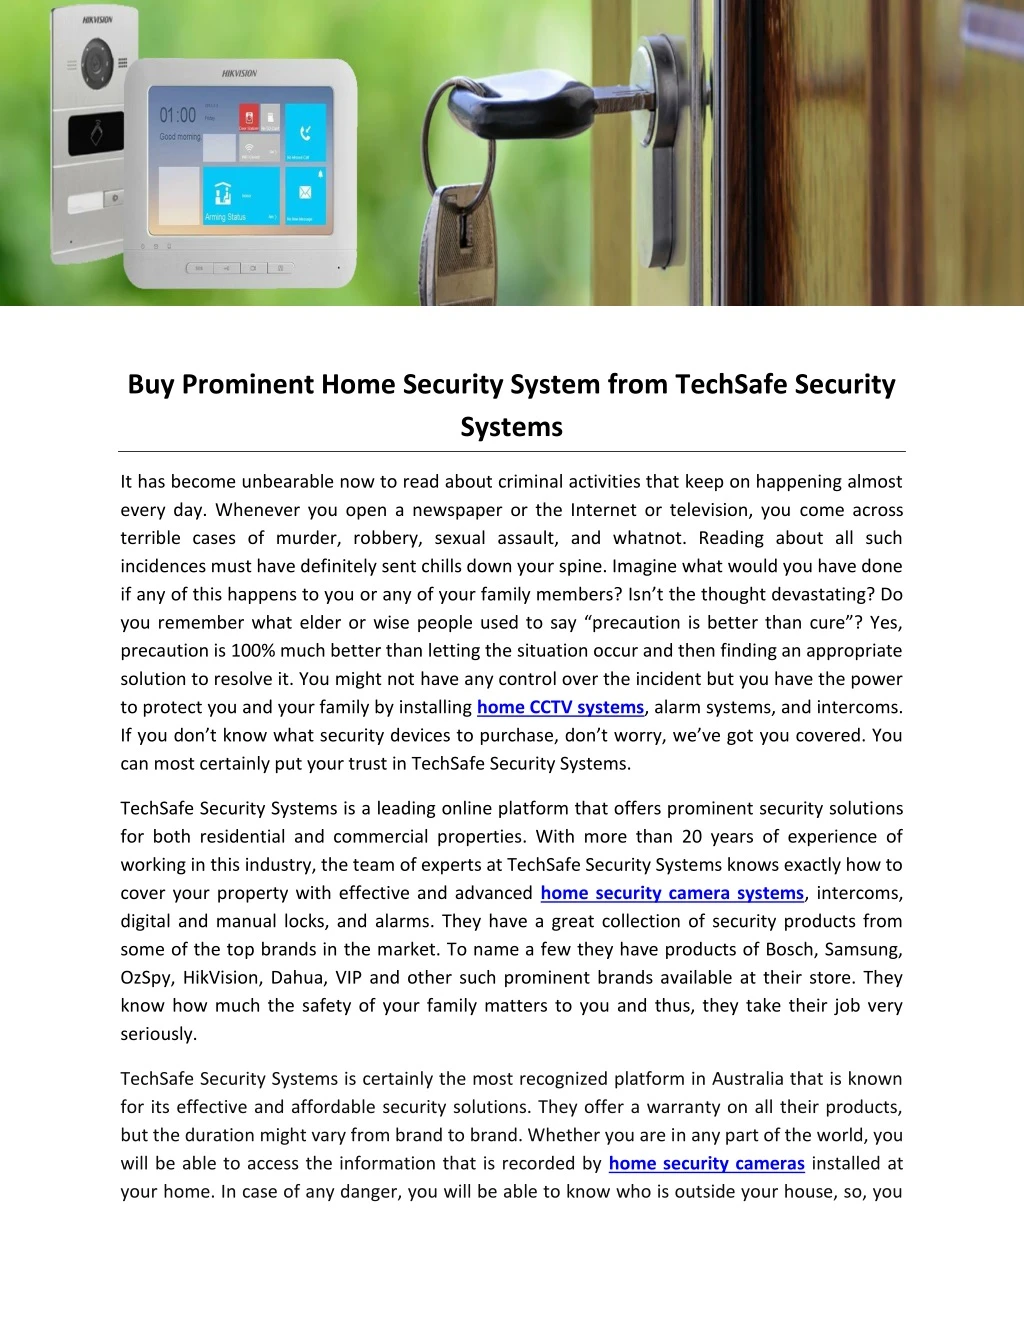 buy prominent home security system from techsafe